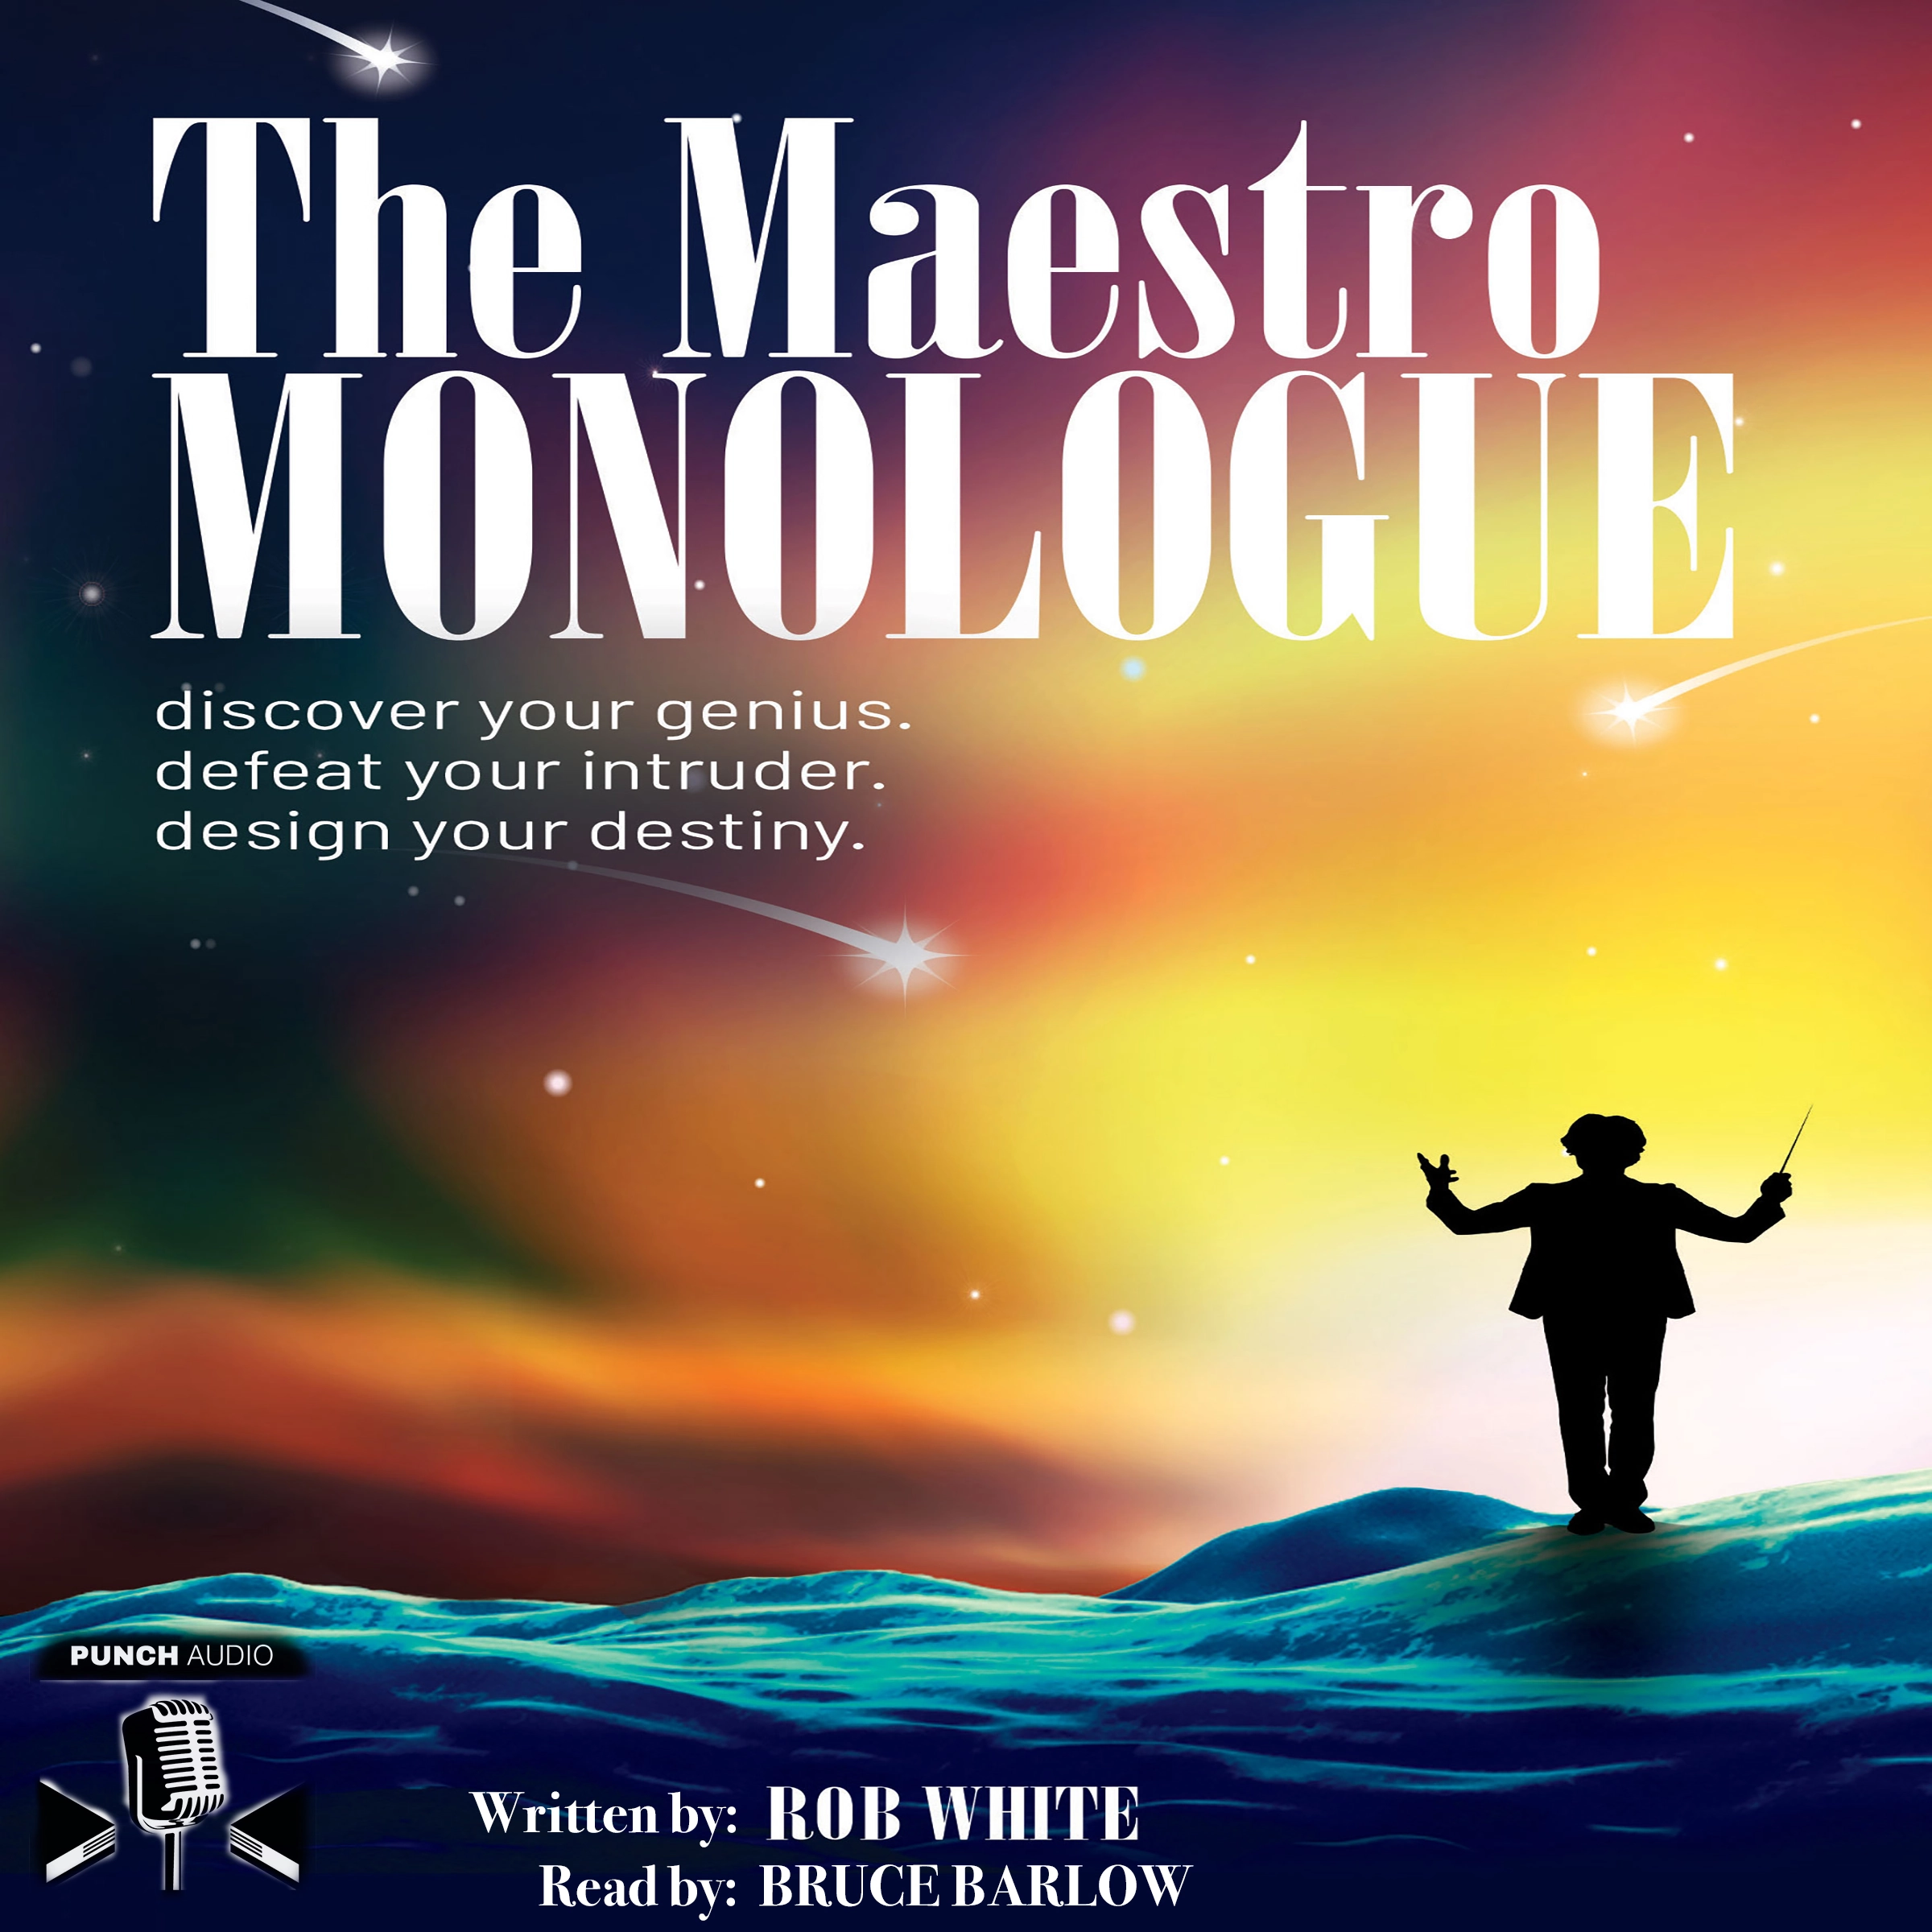 The Maestro Monologue Audiobook by Rob White